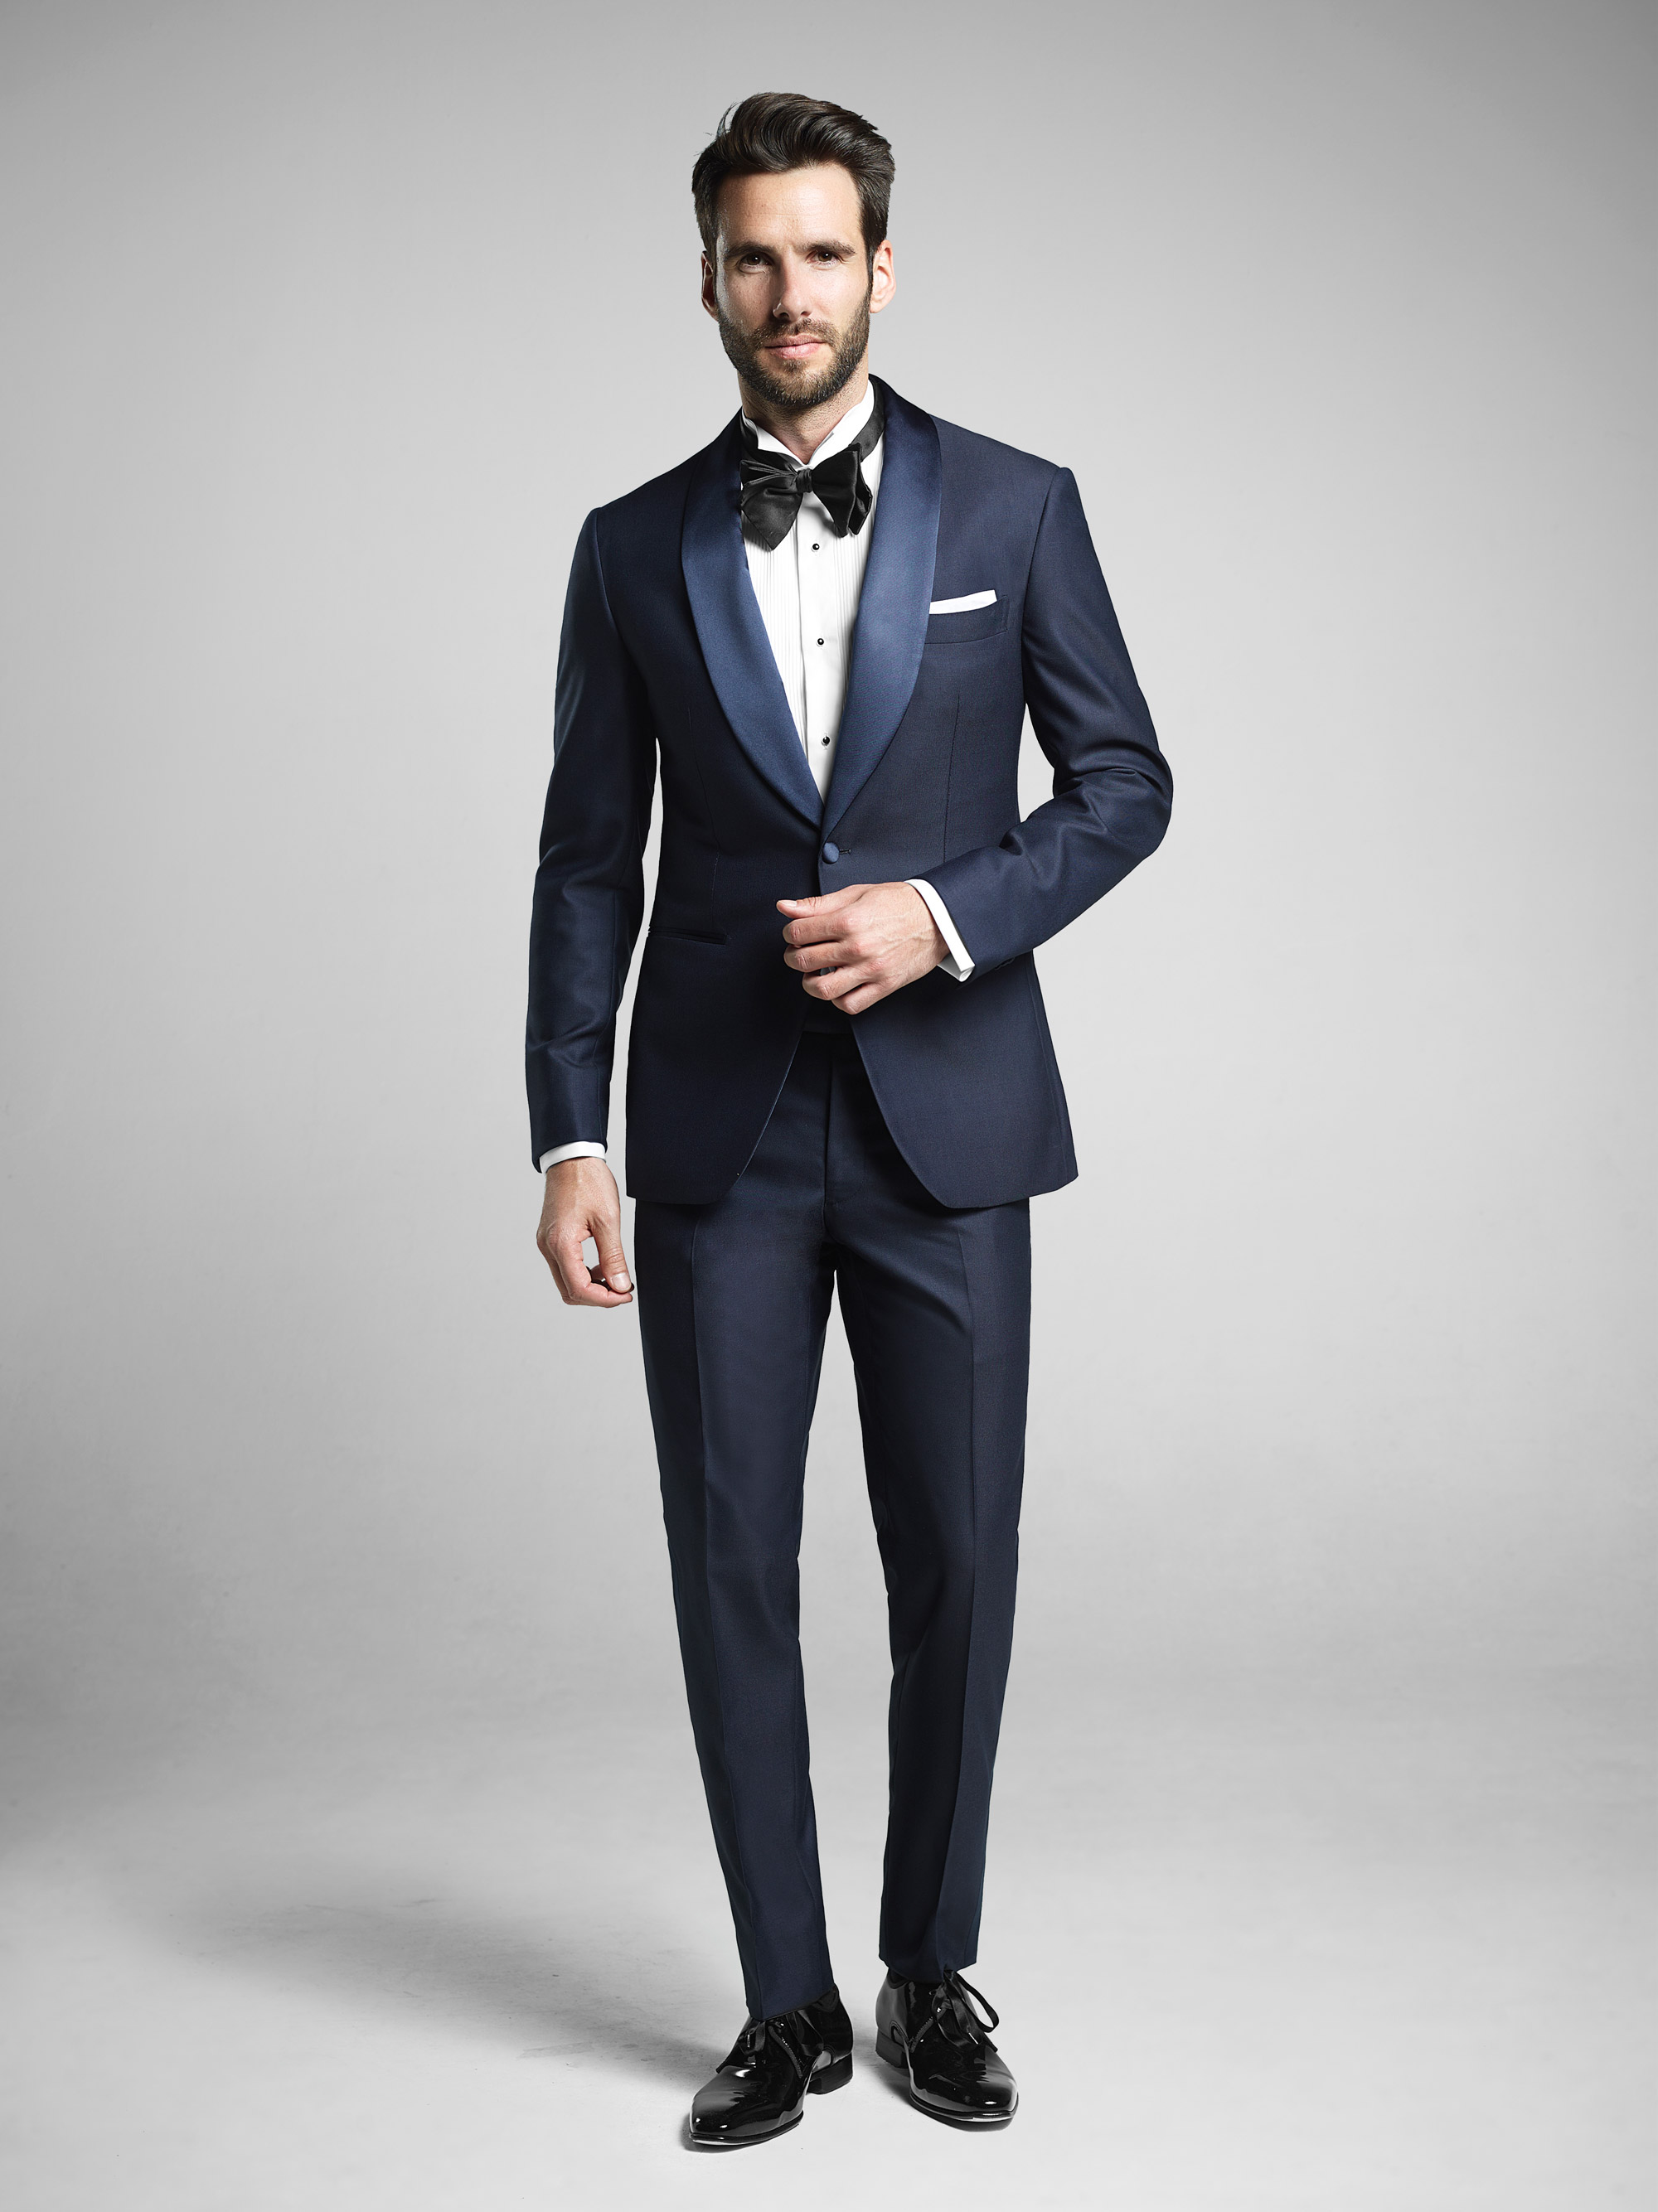 Suits & Tailoring For Wedding, Business, Formal and Country Wear